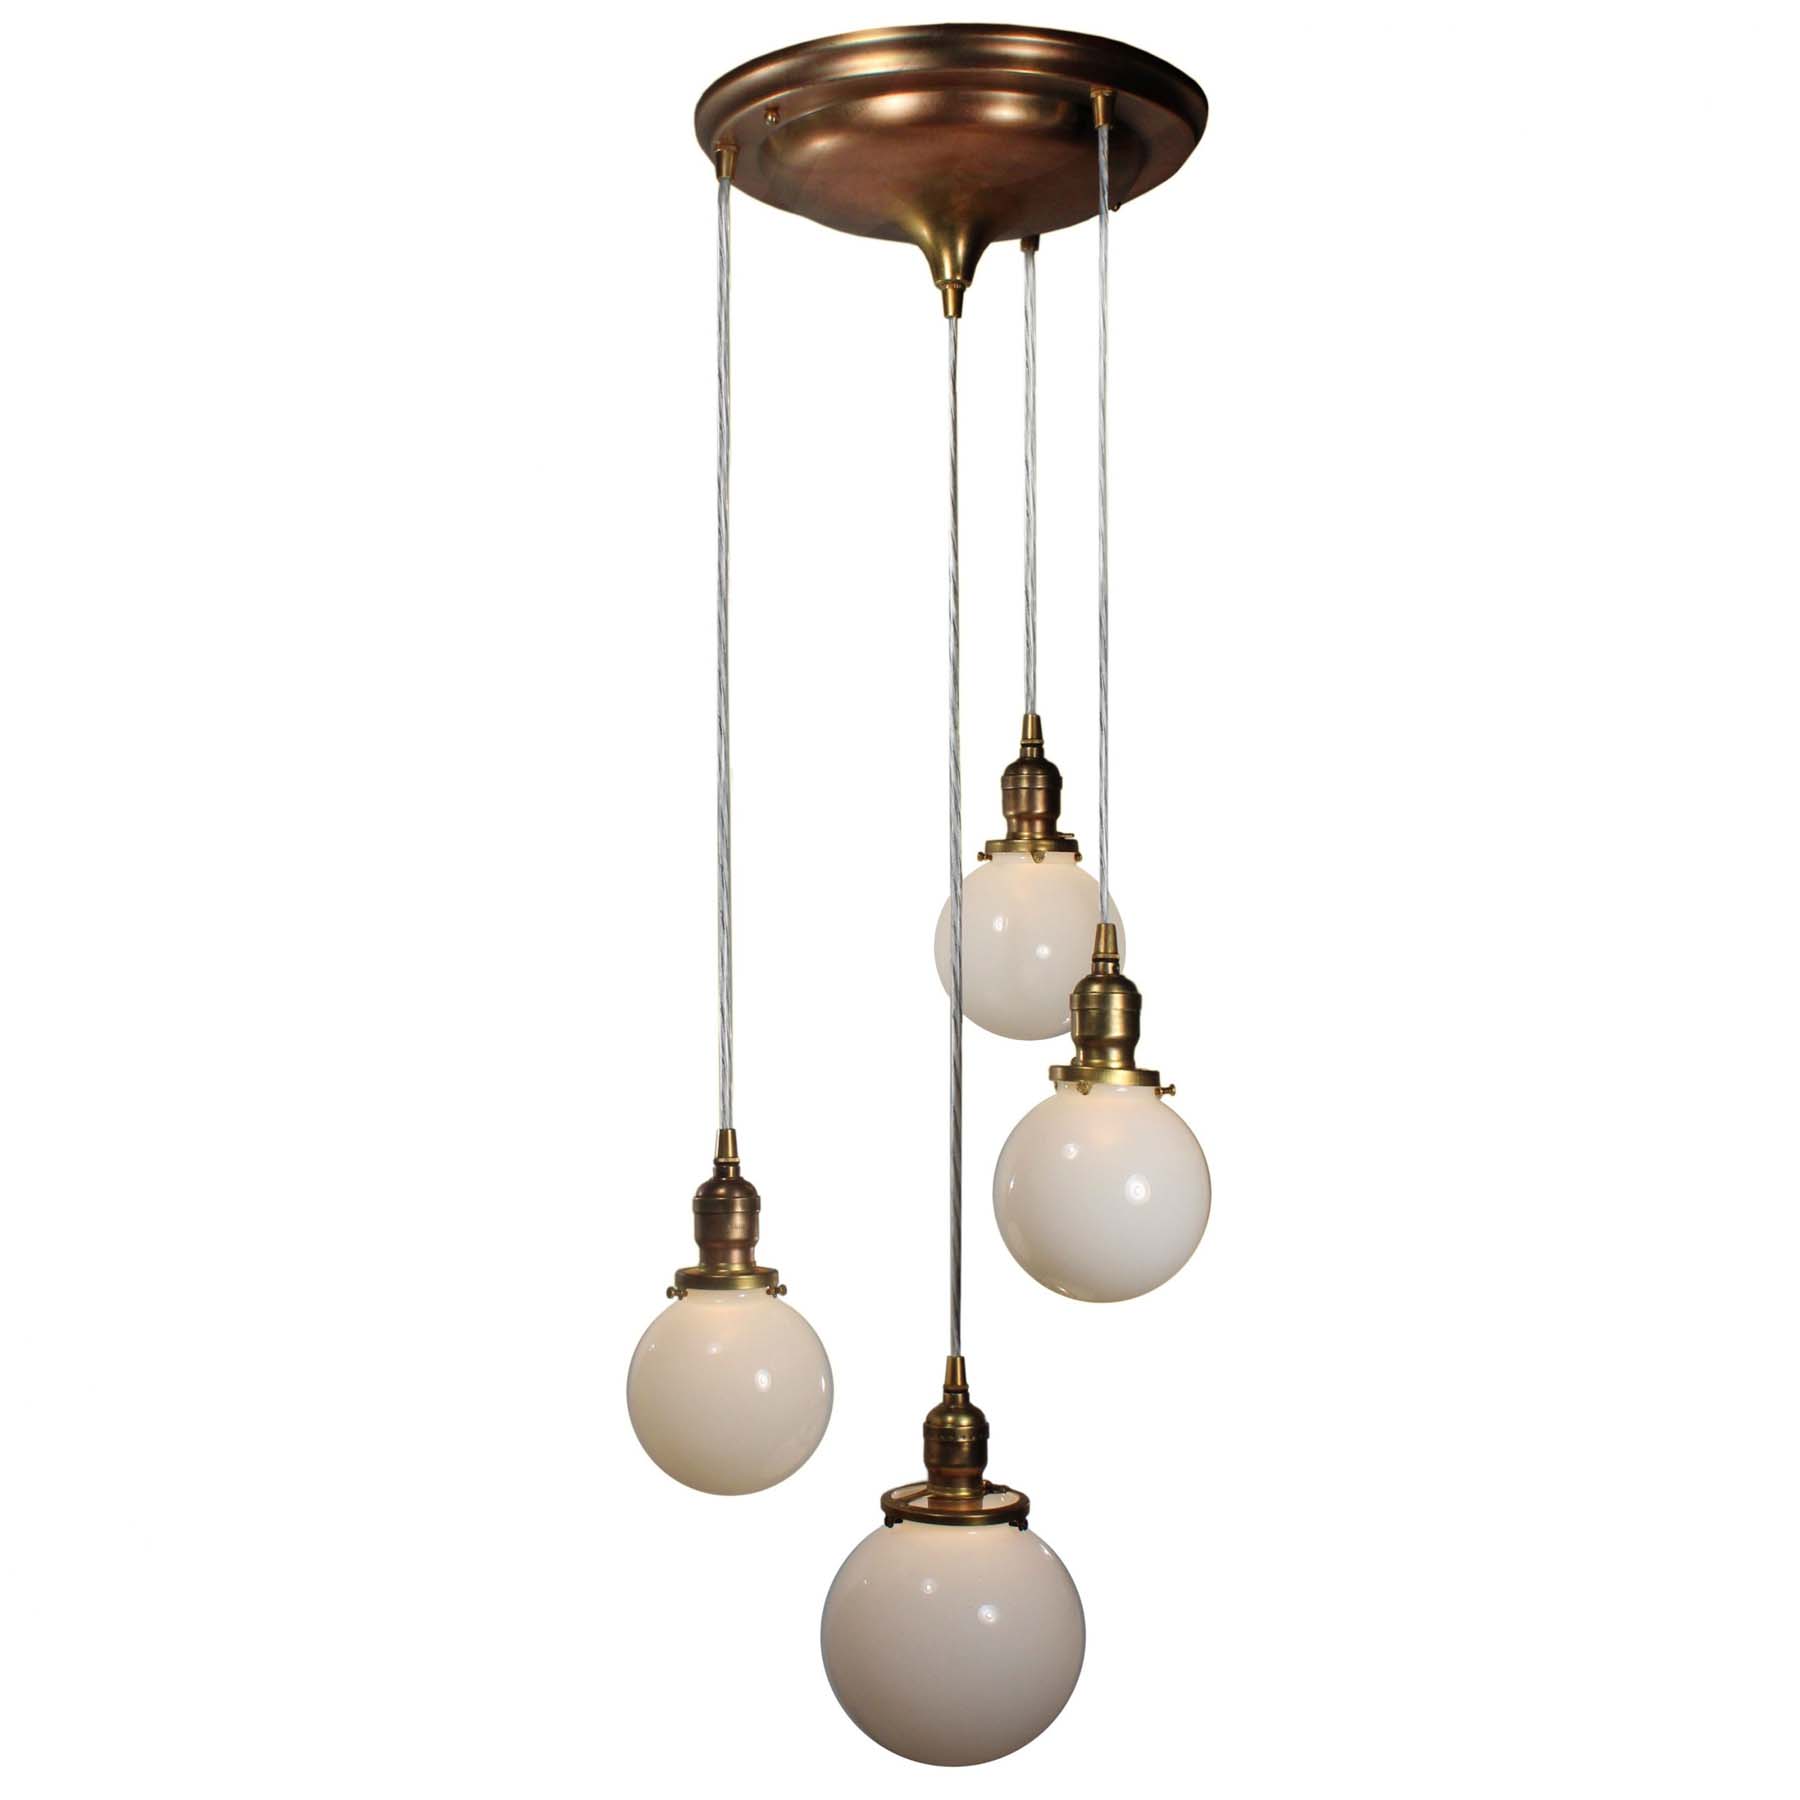 SOLD Semi Flush-Mount Chandelier with Ball Shades, Antique Lighting-0